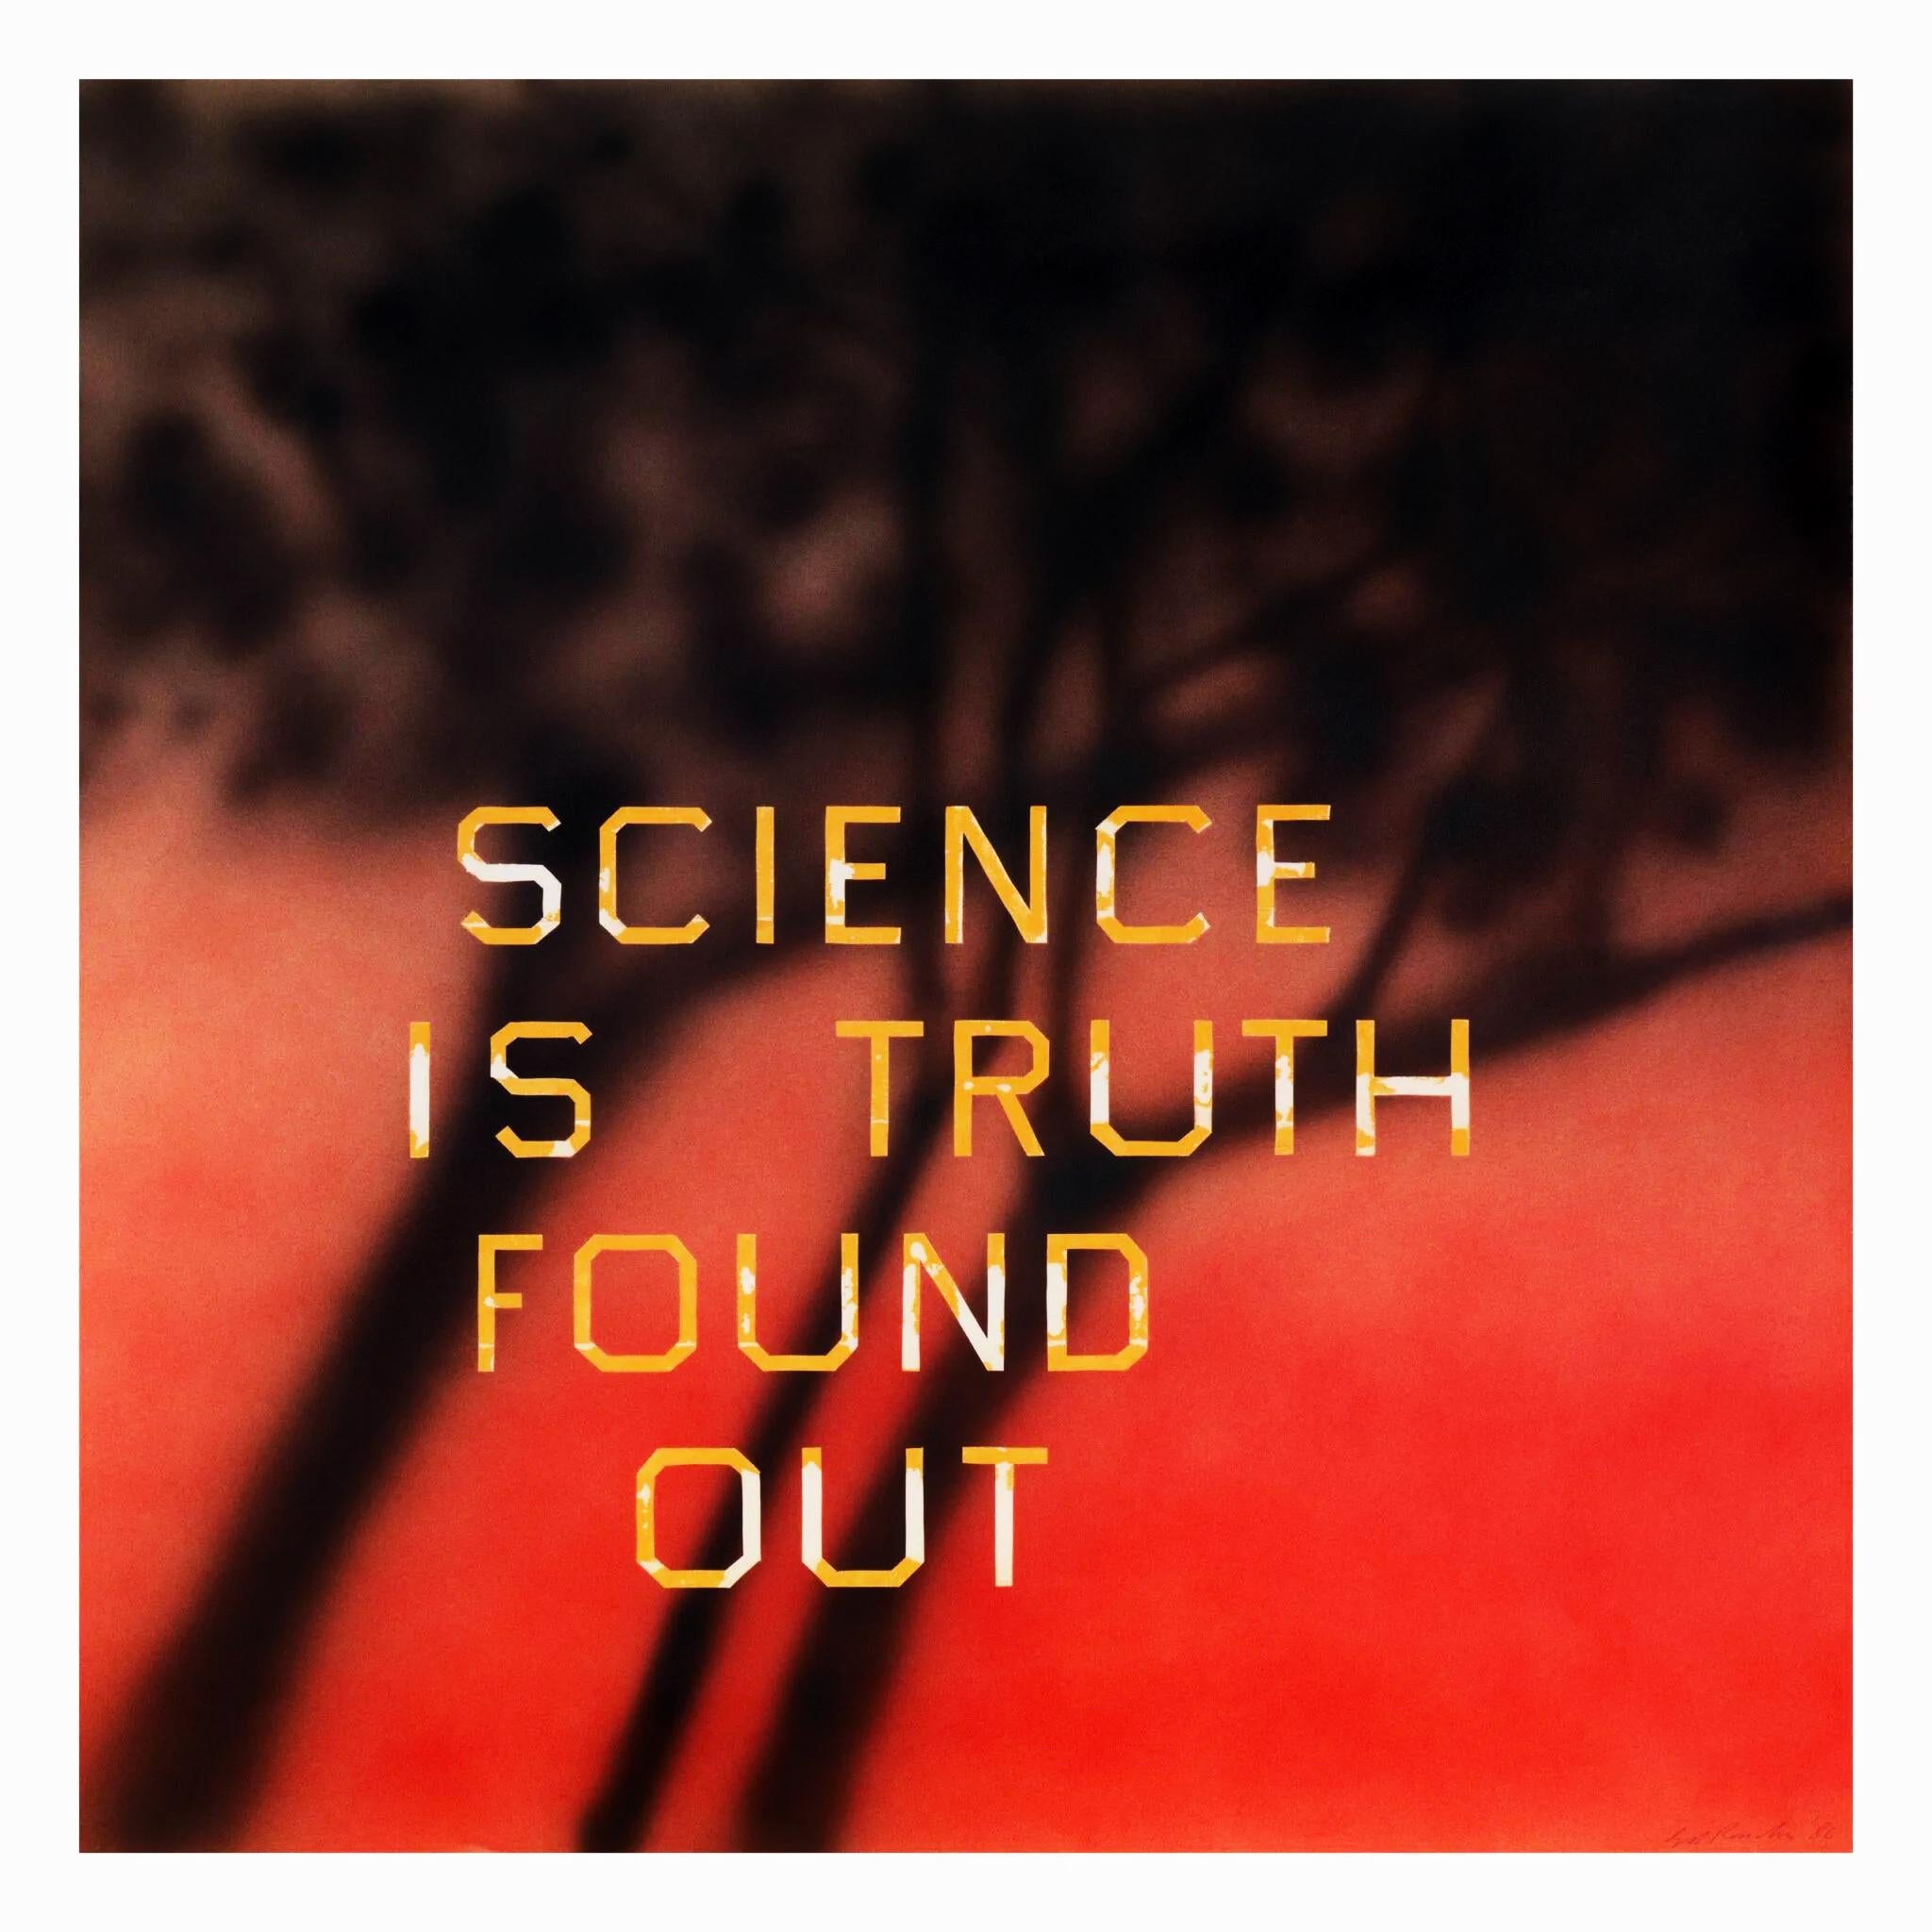 Science Is Truth Found Out - Print by Ed Ruscha